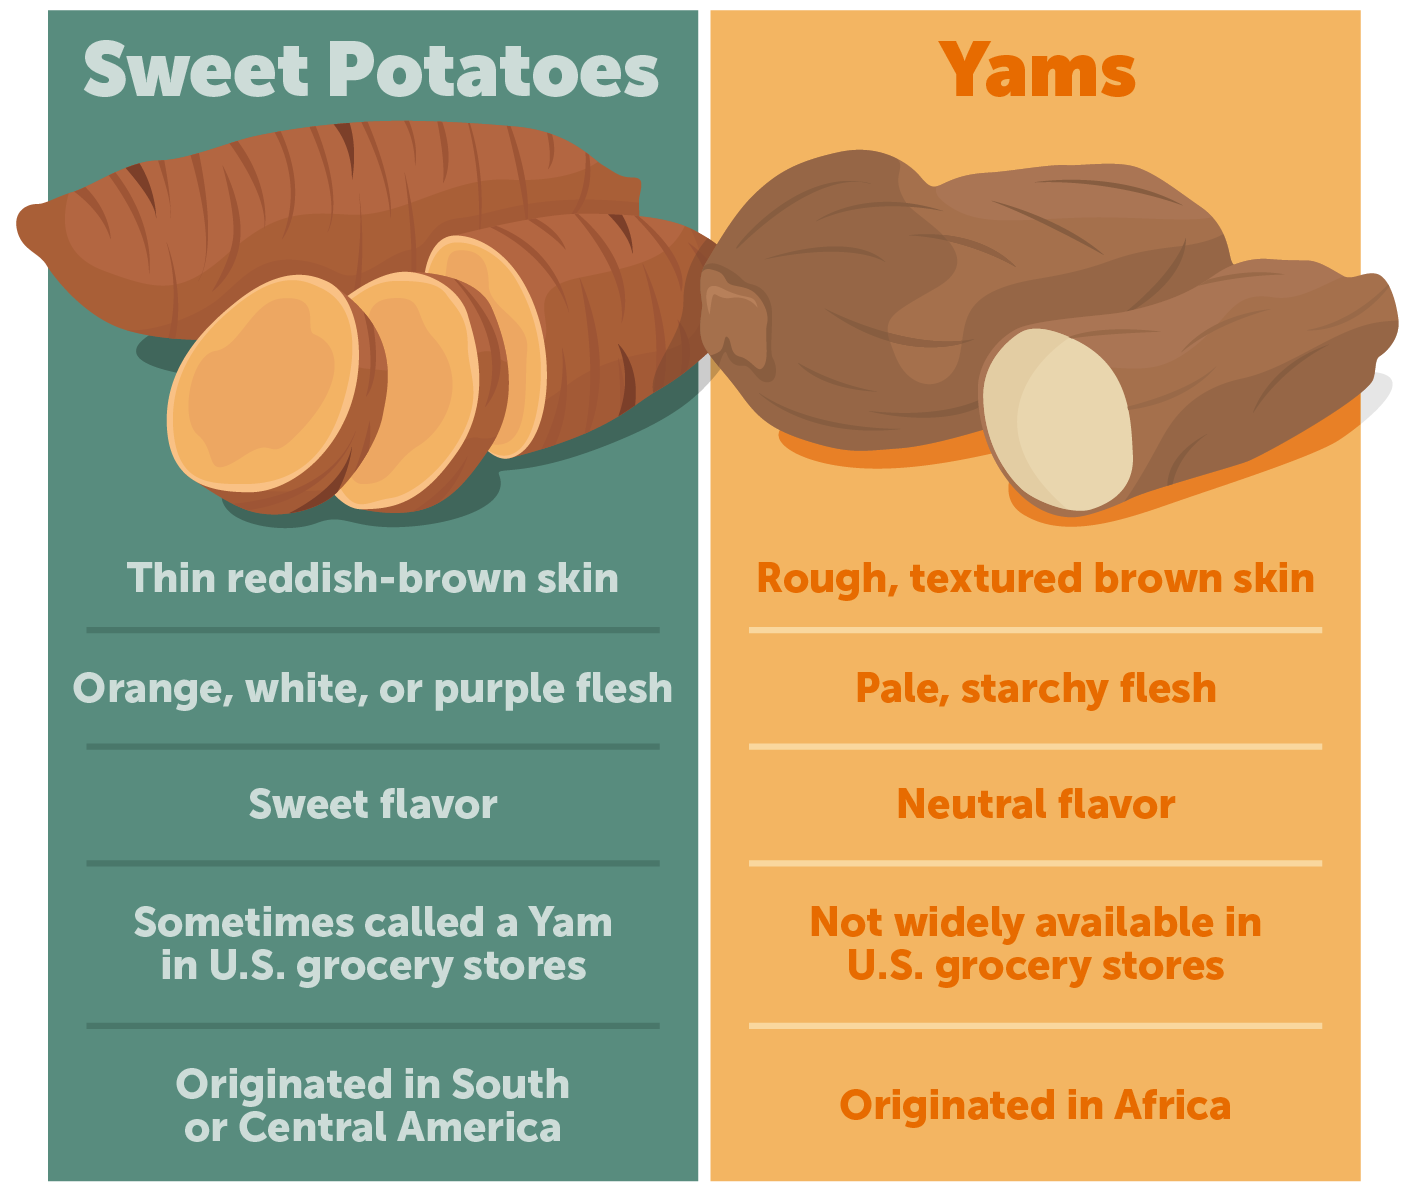 Sweet Potato Vs Yam Are They The Same Thing,Vinegar Based Bbq Sauce Recipe For Pulled Pork